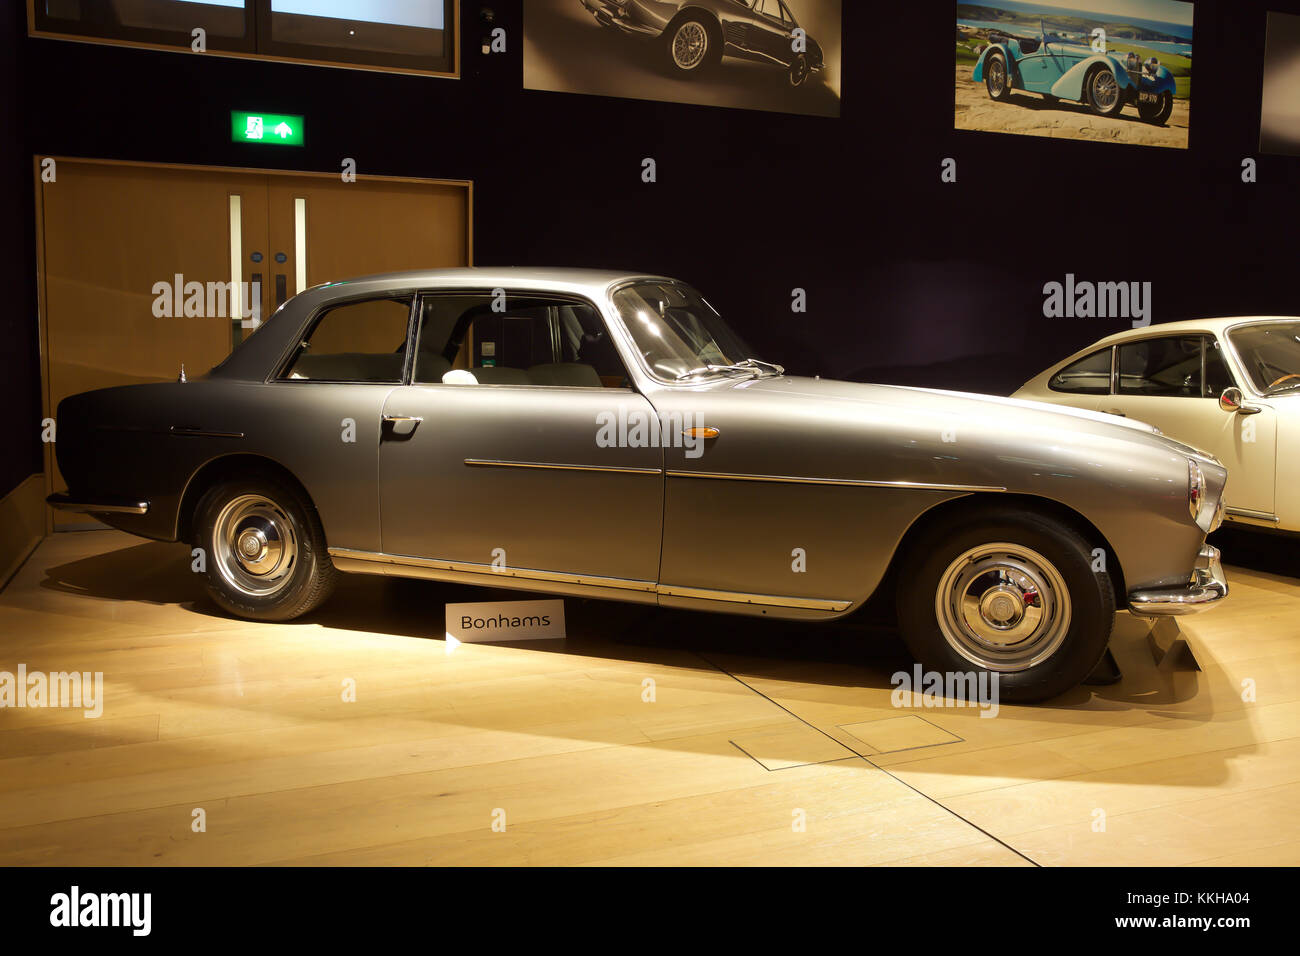 London, UK,1st December 2017, Top Celebrity cars on display at Bonhams in London. Cars include: The ex-Sir Paul McCartney 1964 Aston Martin DB5 Sports Saloon (£1,250,000 - £1,500,000) and the ex-Ringo Starr 1966 Austin Mini Cooper S (£90,000-120,000). There were also two Bentleys previously owned by Sir Elton John: 1959 Bentley S1 Continental Sport Saloon (£400,000-500,000) and 1960 Bentley S2 Continental Flying Spur Sports Saloon (£160,000-190,000). Credit: Keith Larby/Alamy Live News Stock Photo